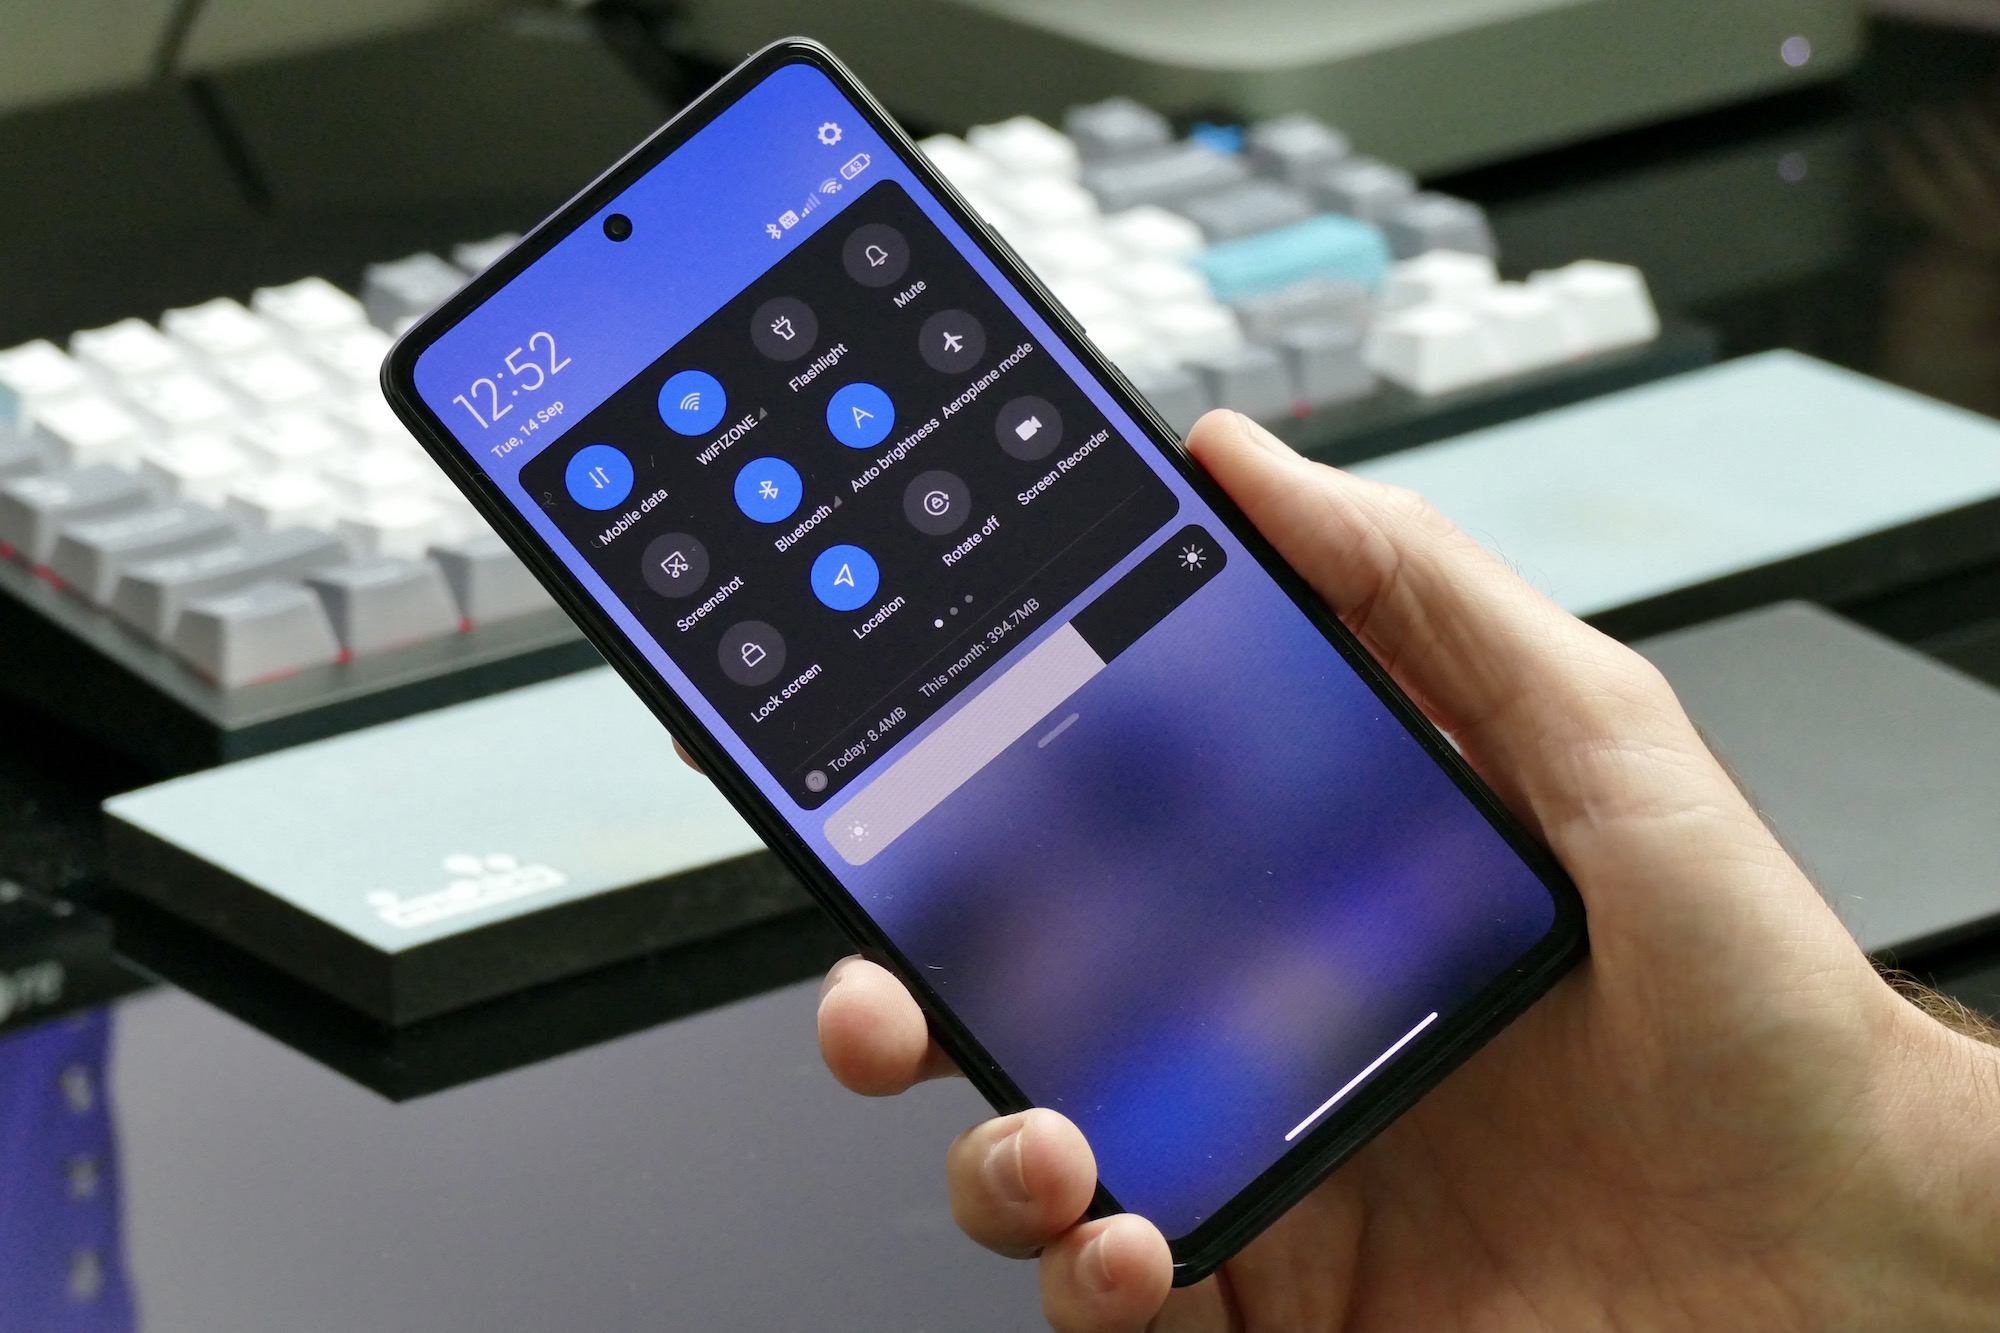 Xiaomi 11T Pro review: technical data, availability and price